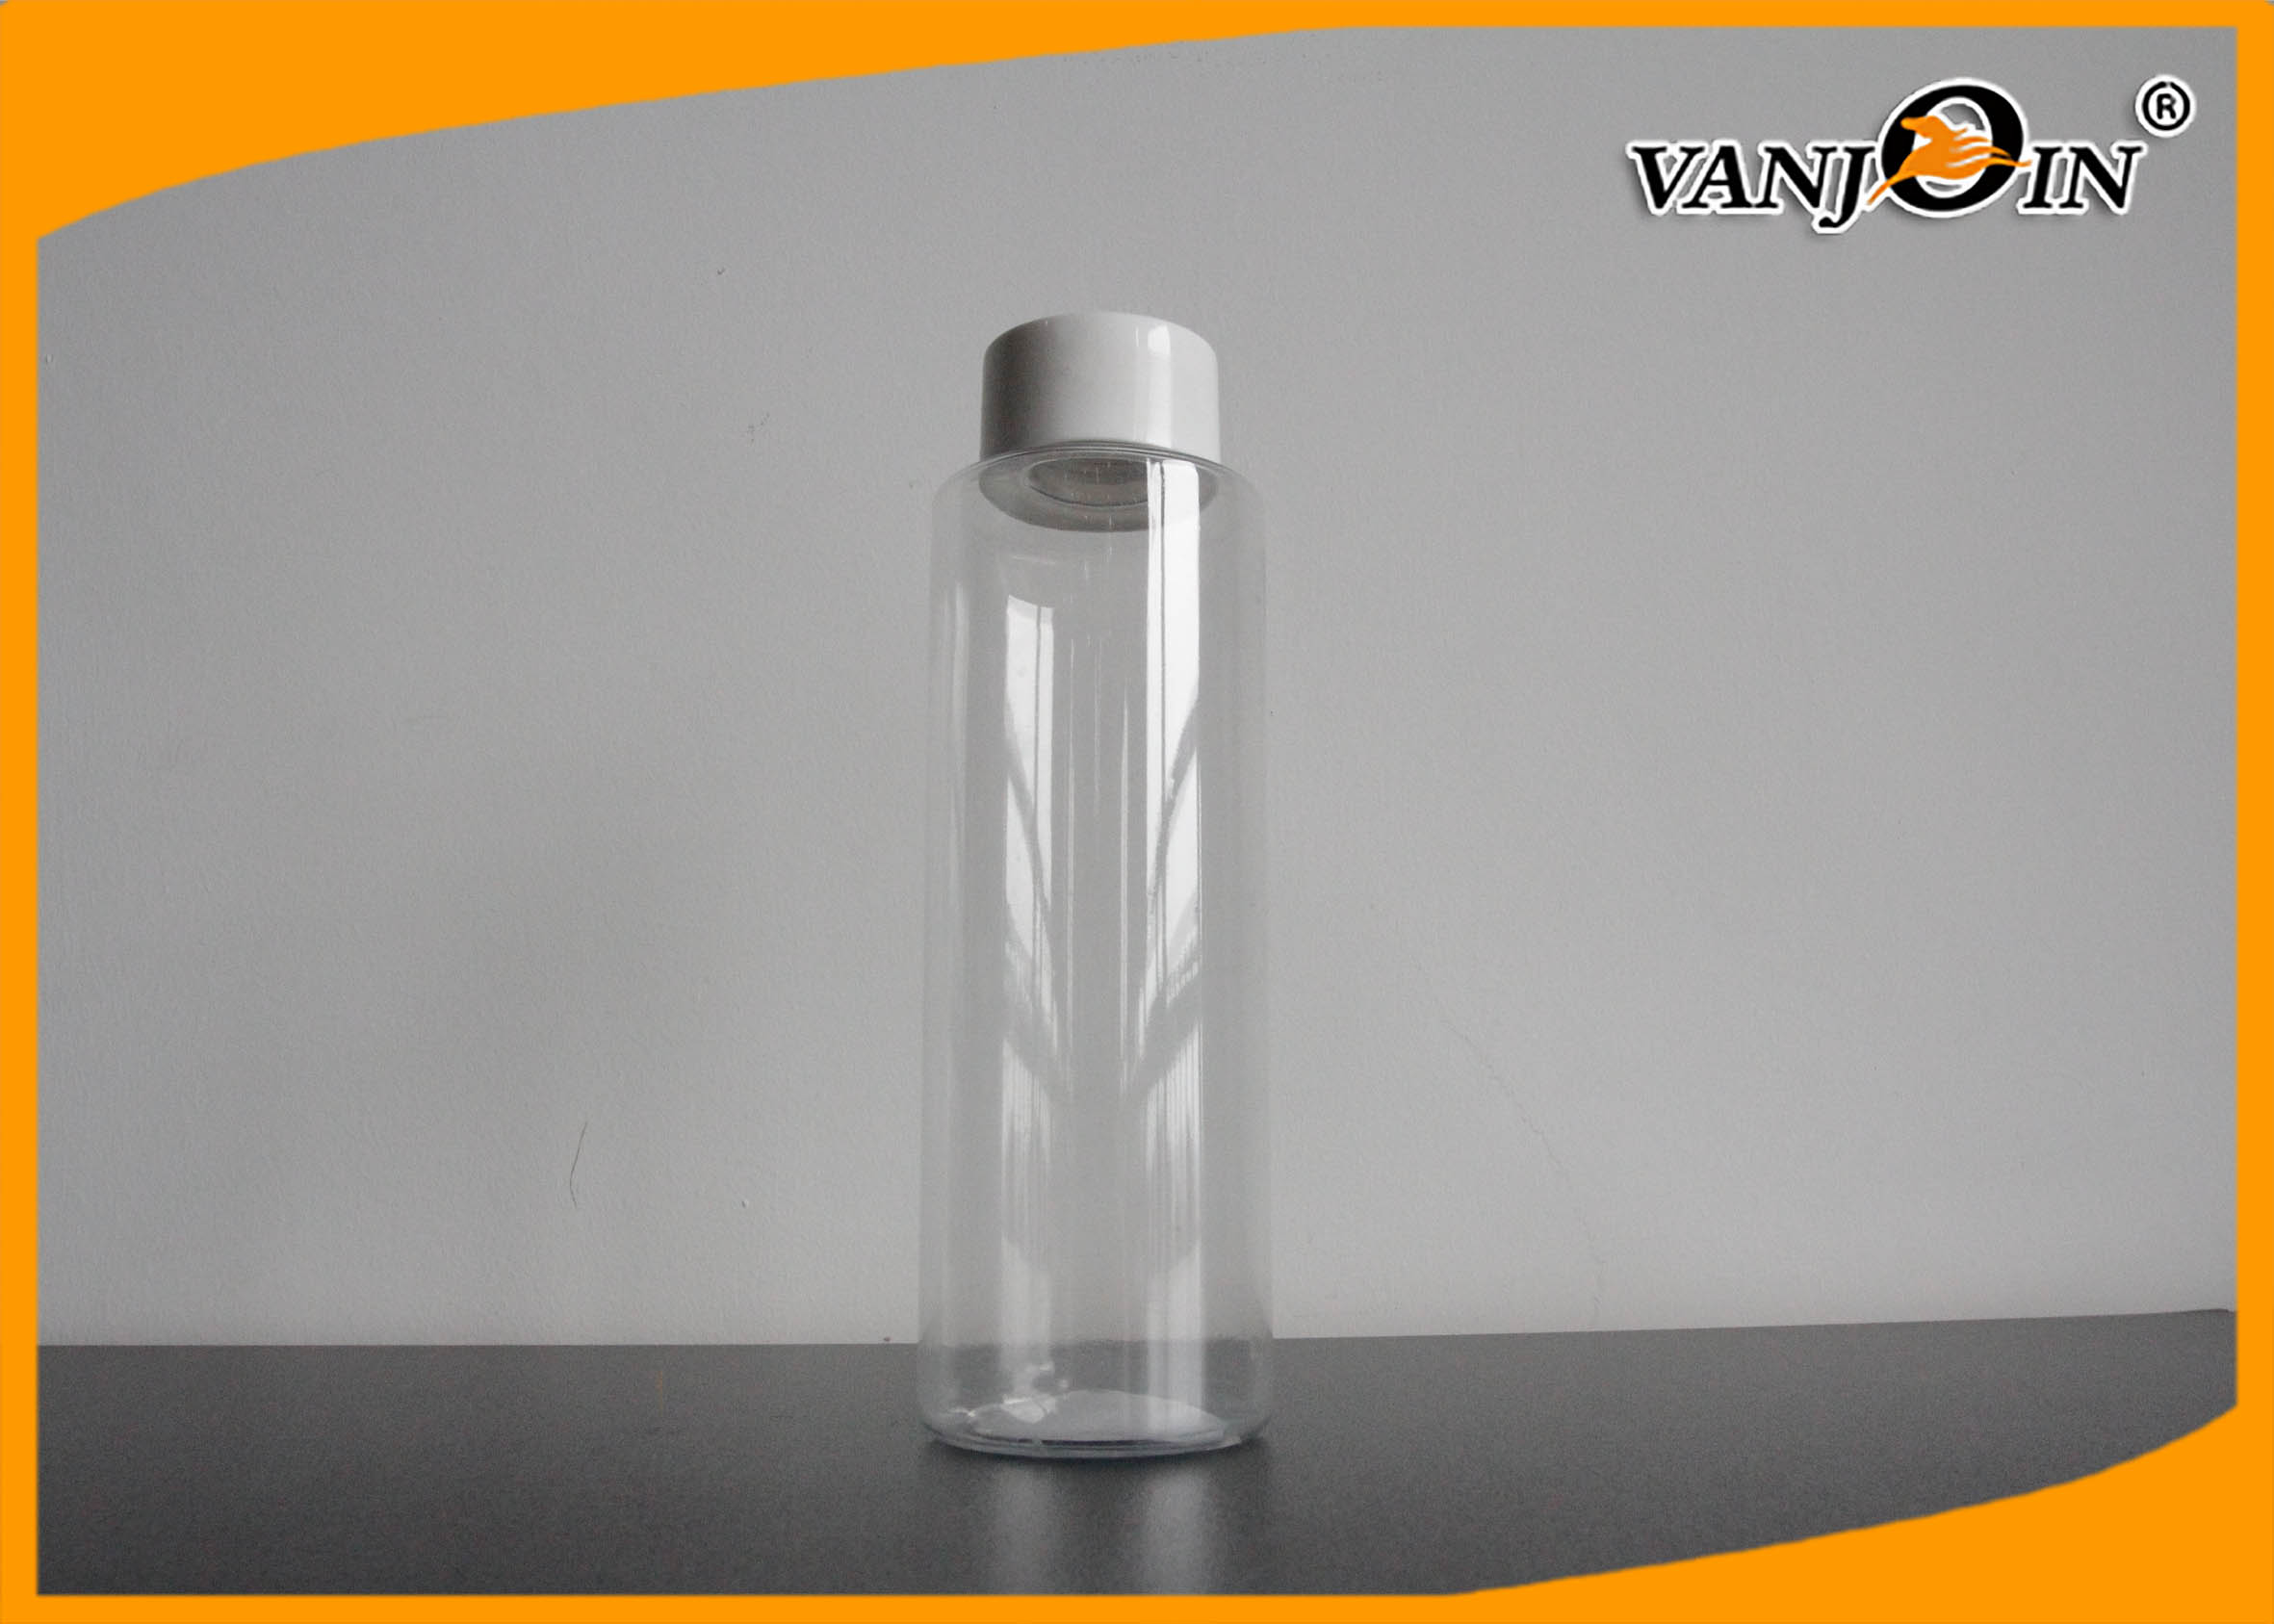 Download 400ml Empty Cylindrical Plastic Juice Bottles With Caps Recycled Clear Plastic Bottles